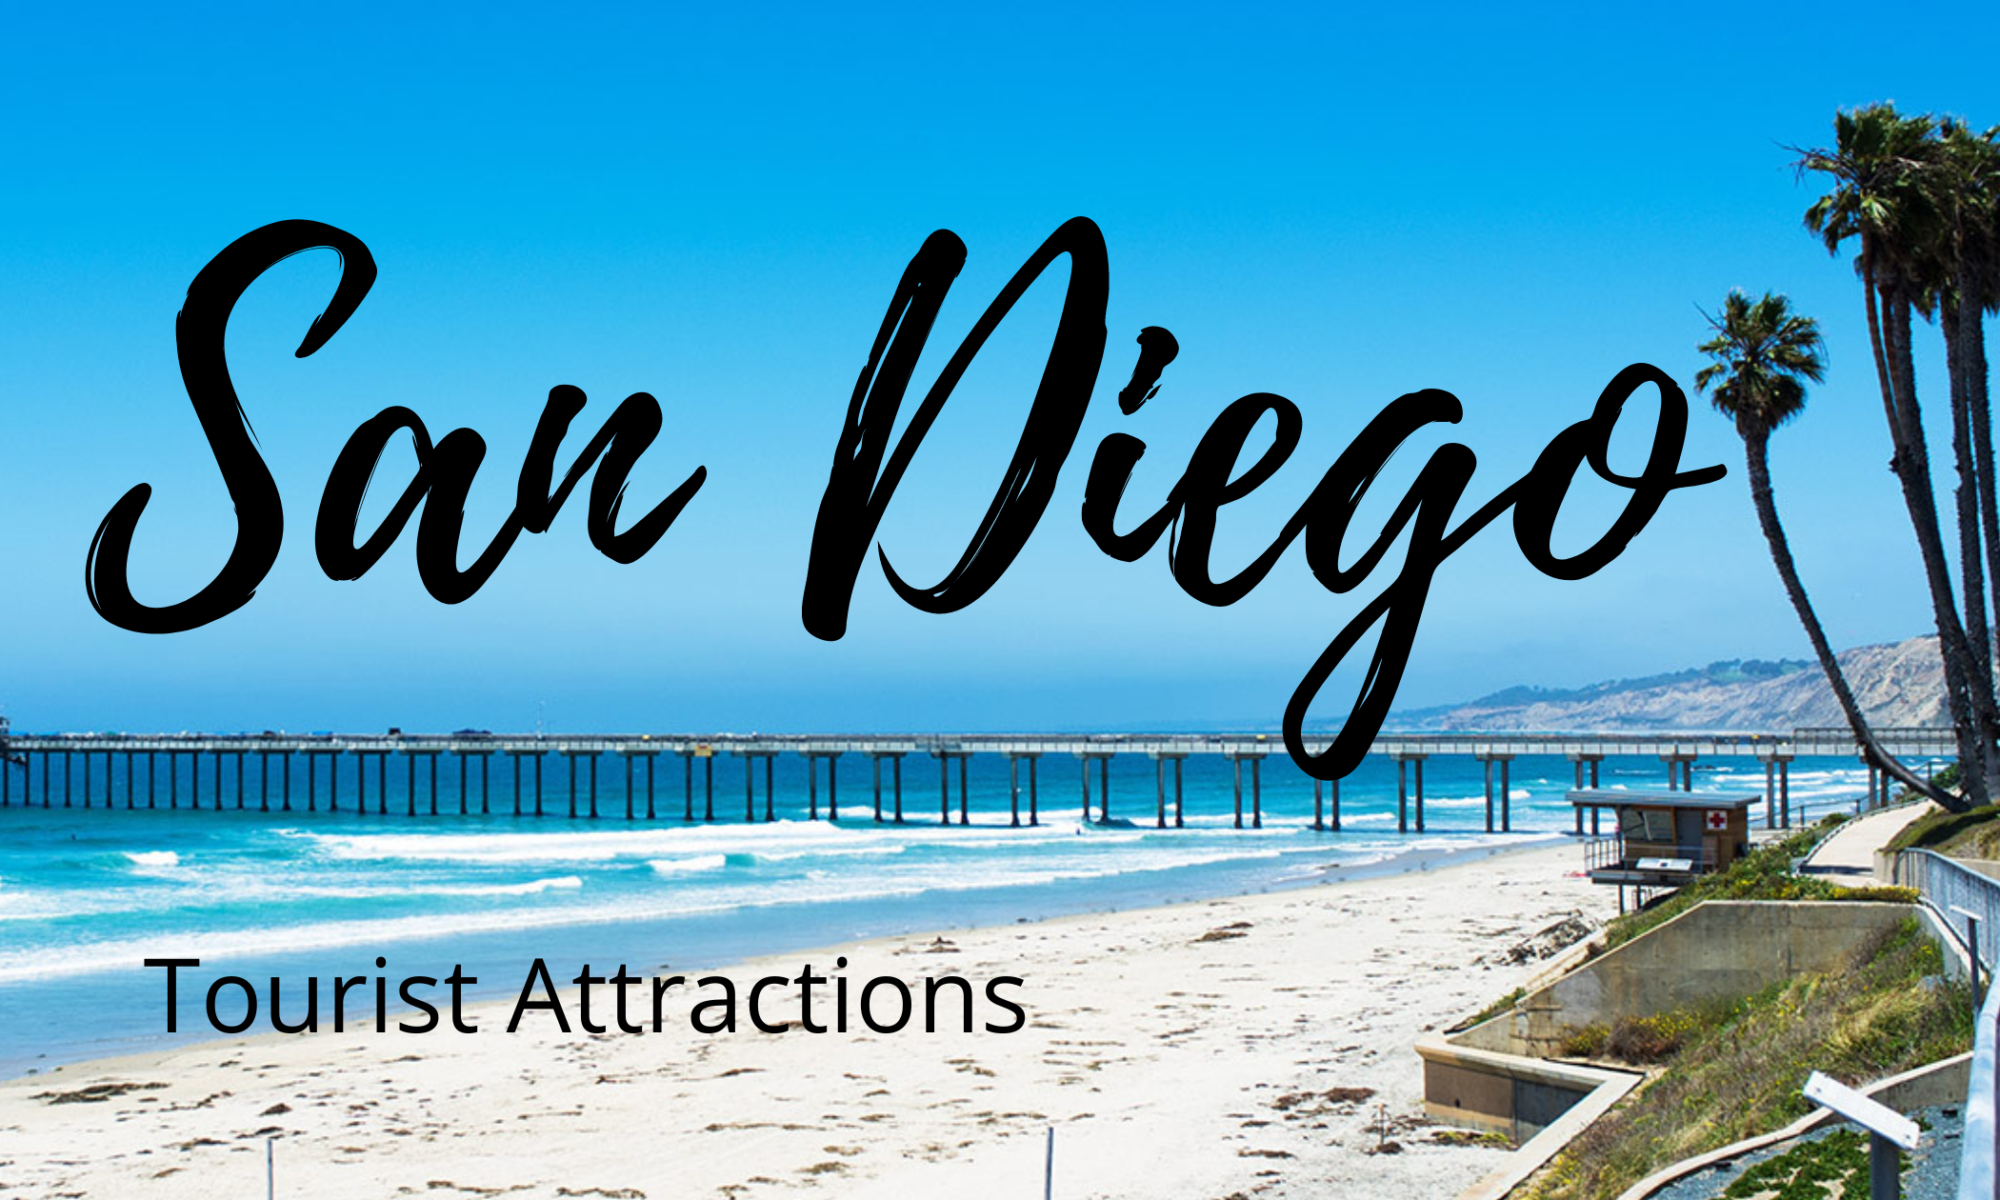 San Diego – Tourist Attractions, Things to do, Hotels and Restaurants